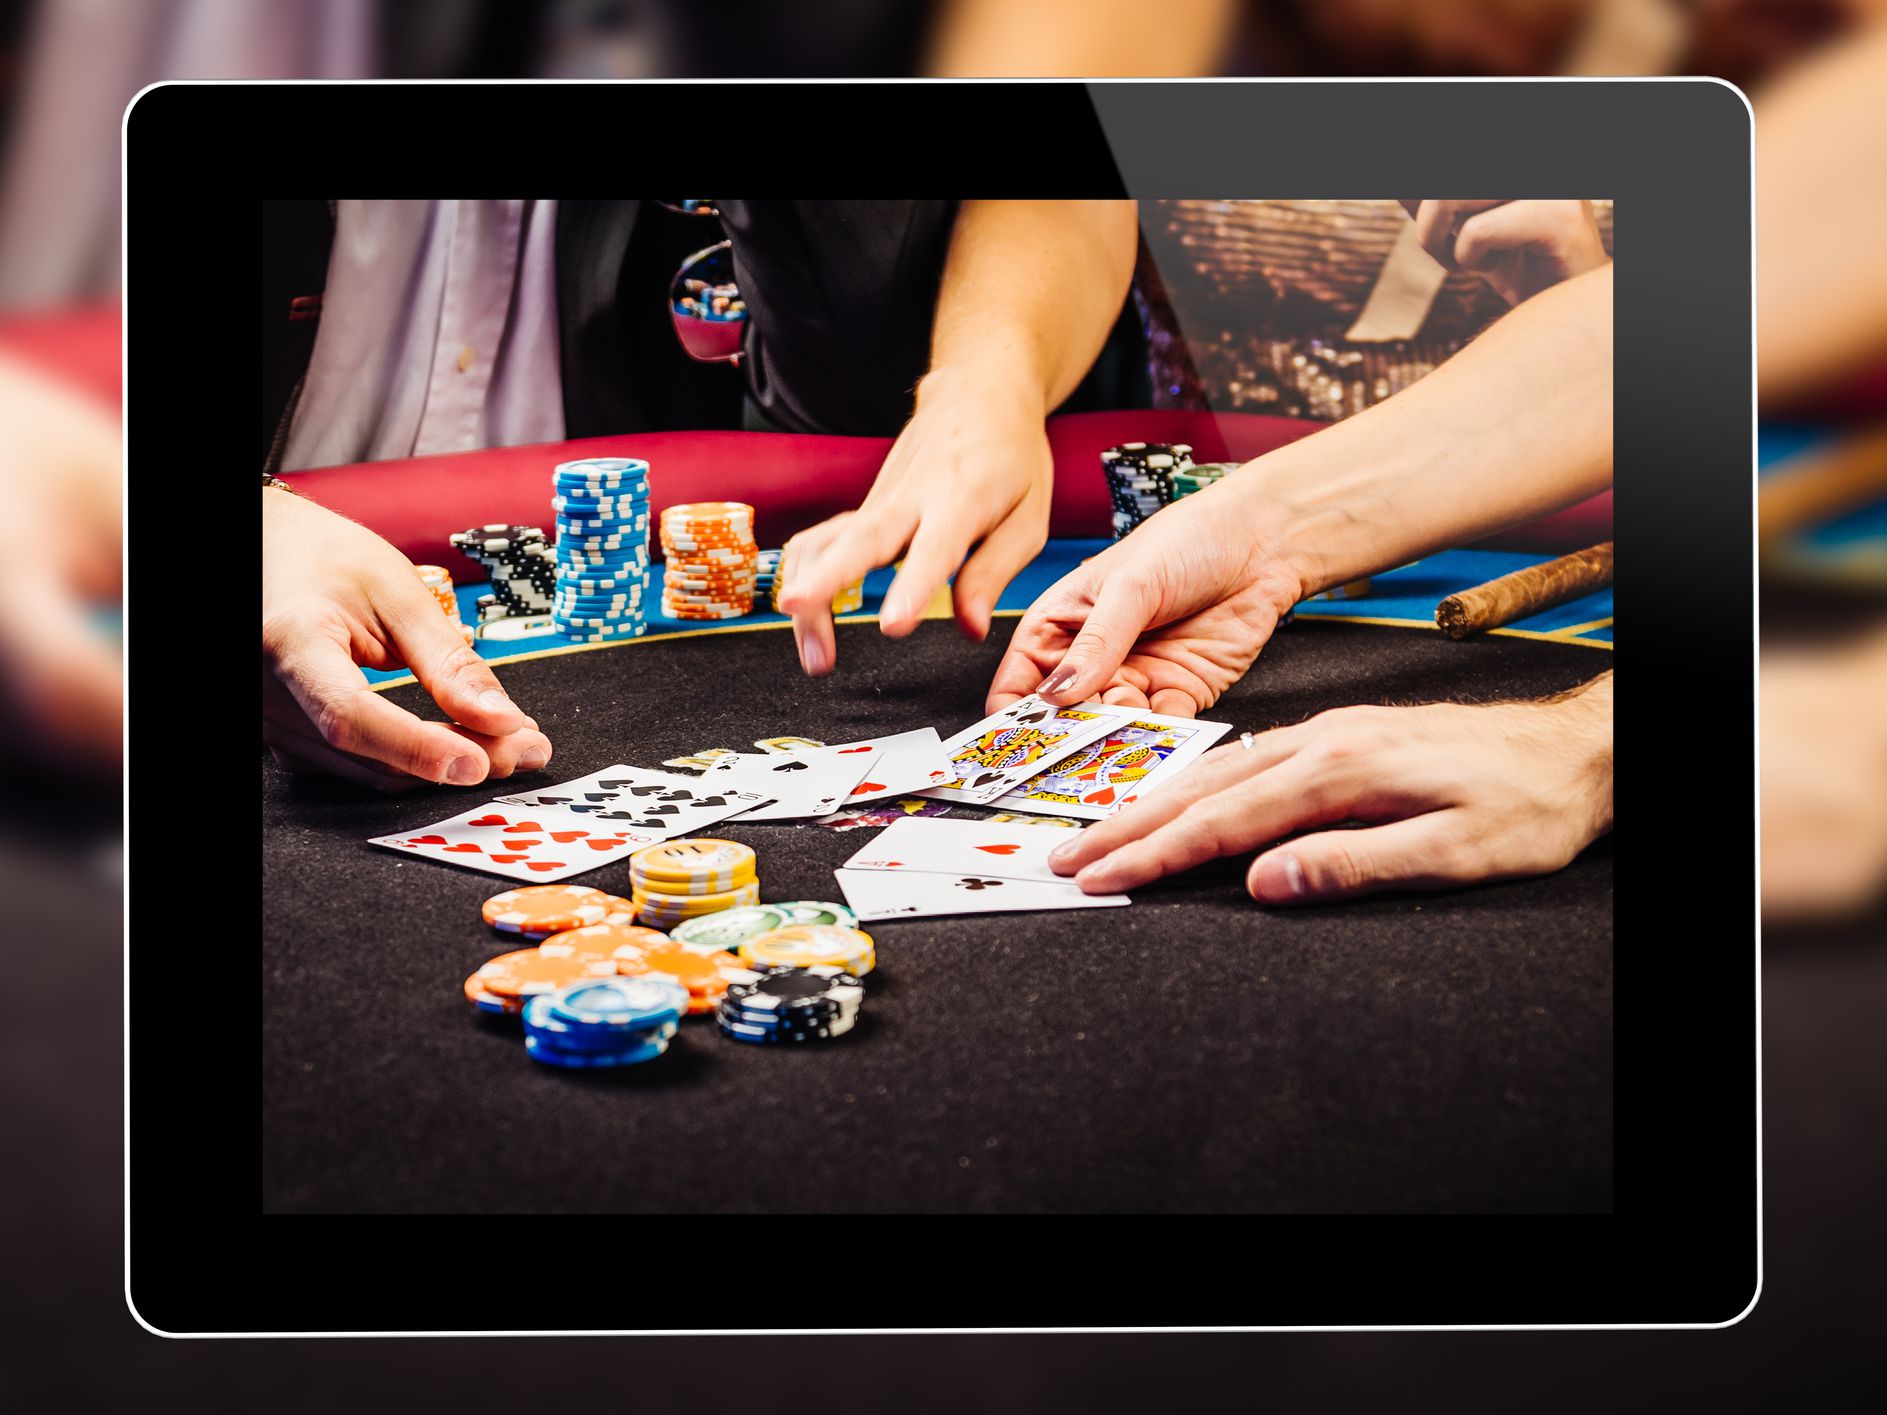 Learn the advantages of playinginternetcasinogames